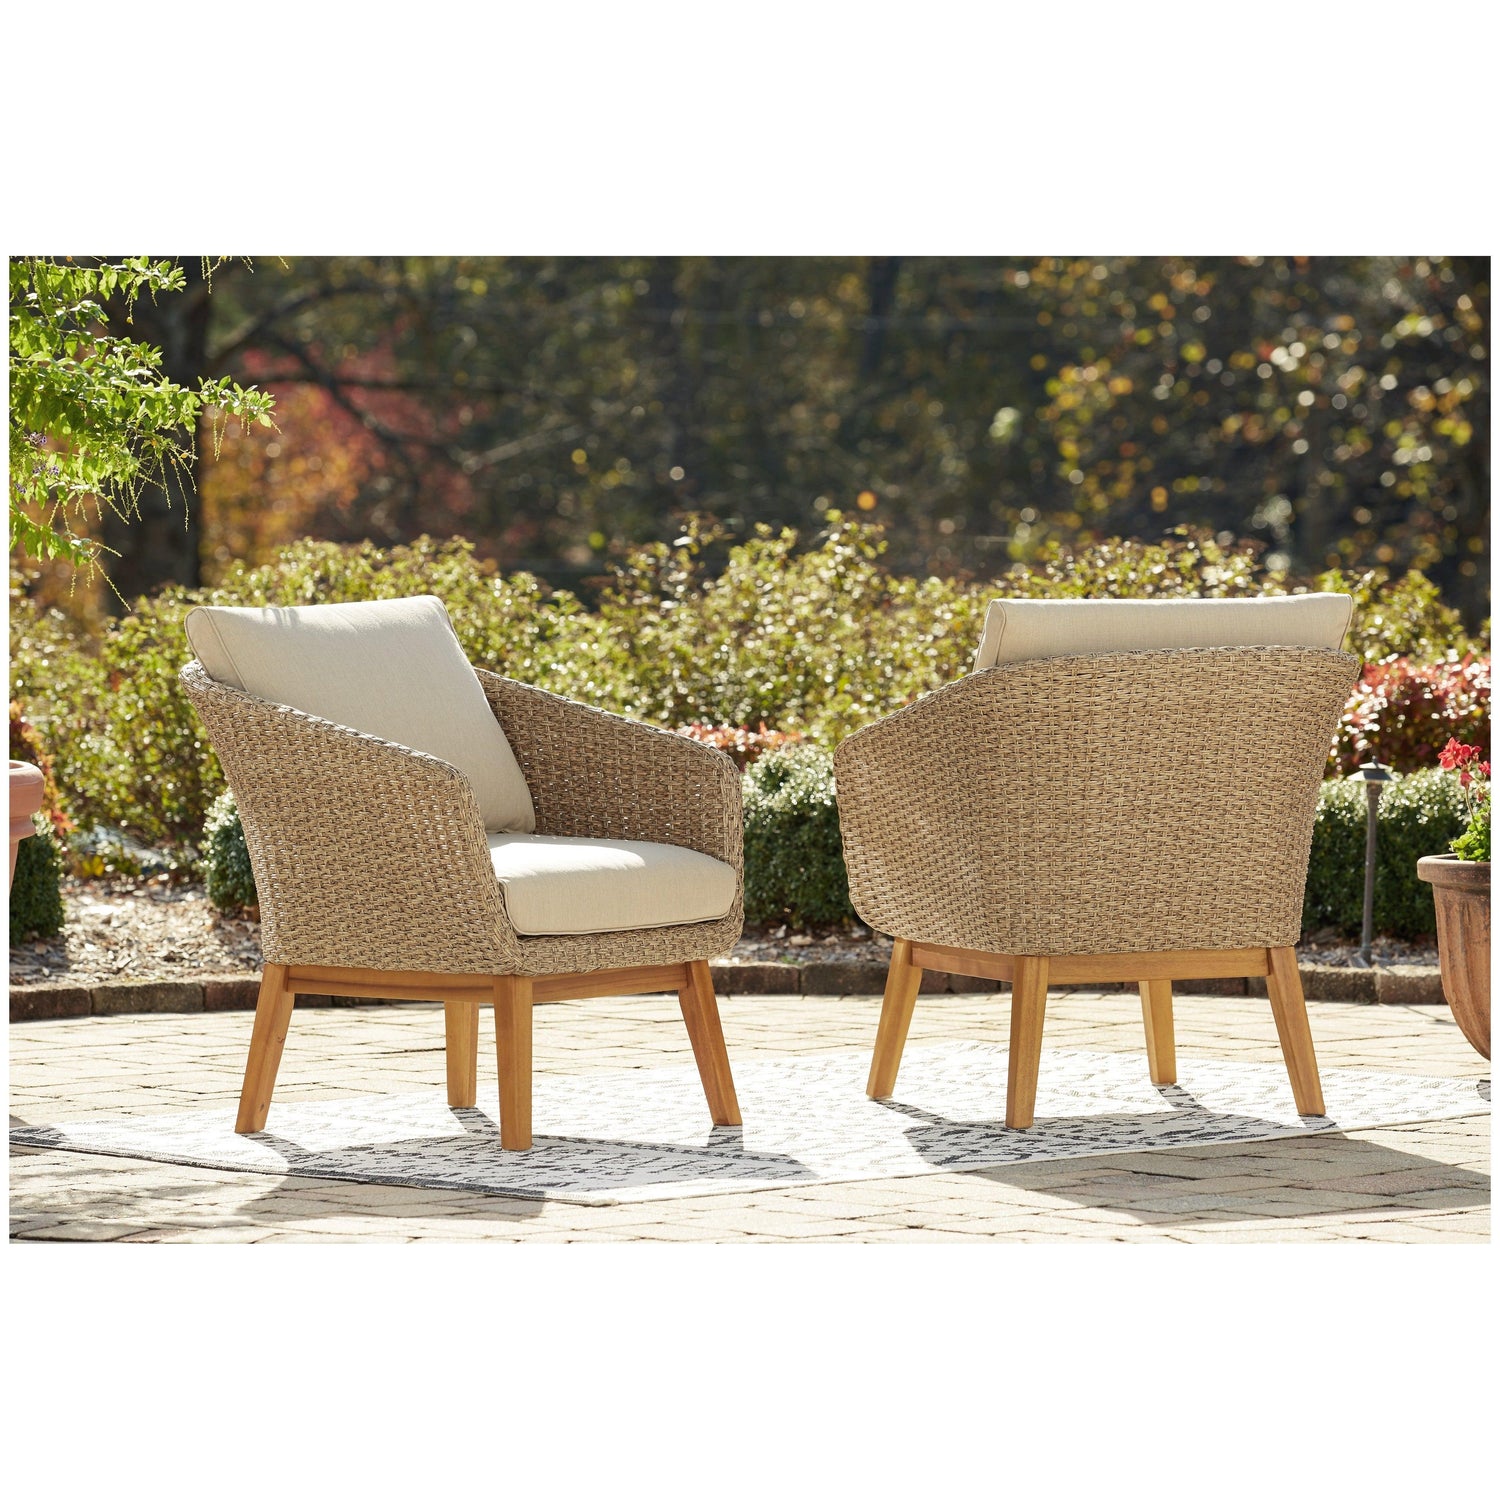 Crystal Cave Outdoor Lounge Chair with Cushion (Set of 2) Ash-P350-820